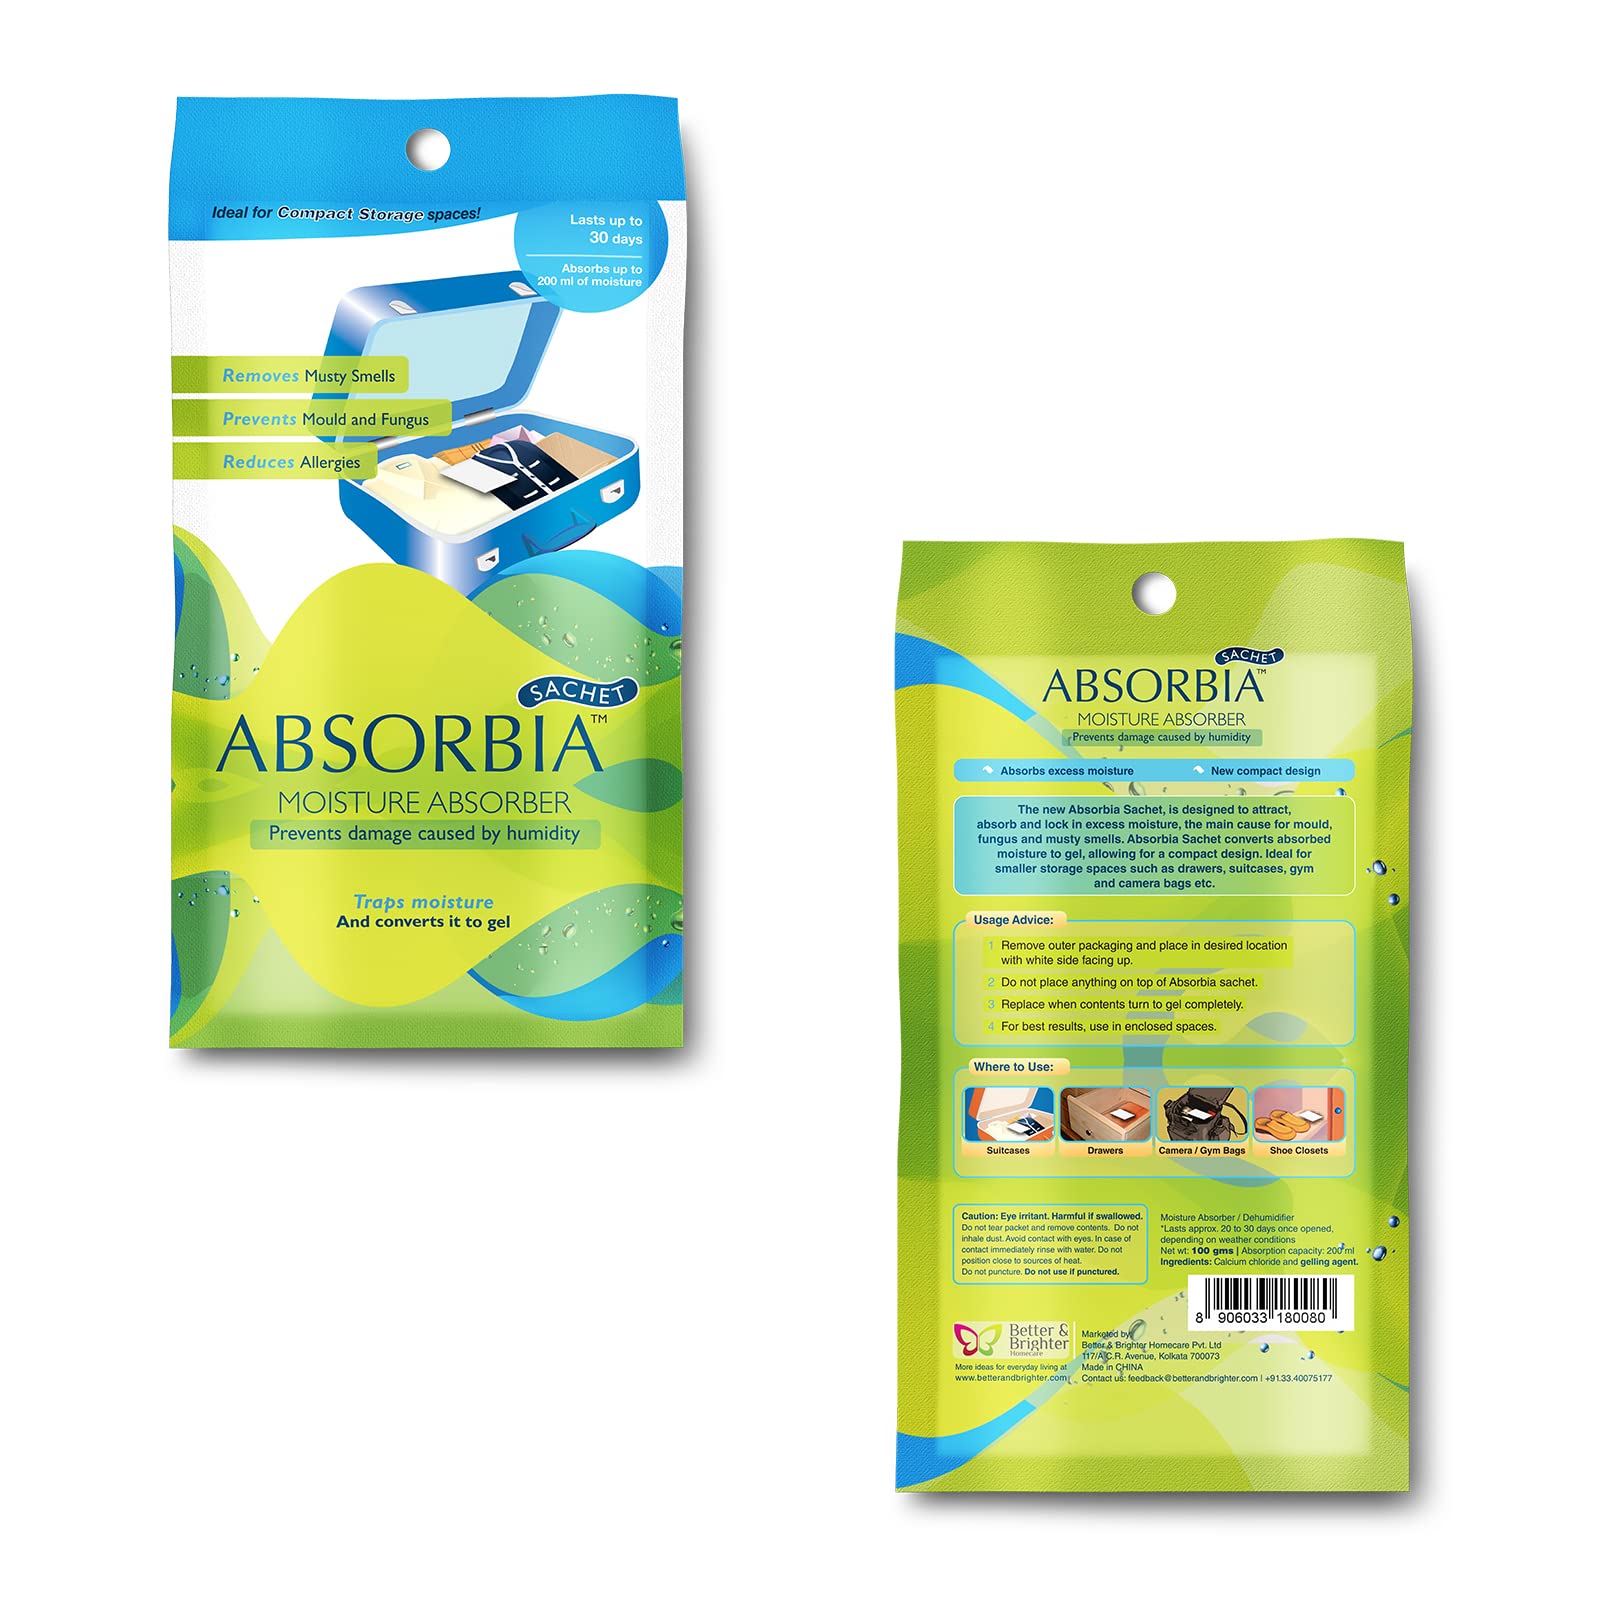 Absorbia Moisture Absorber | Absorbia Sachet - Season Pack of 96 (200ml Each) | Dehumidier for Bags, Suitcases Drawers | Fights Against Moisture,…